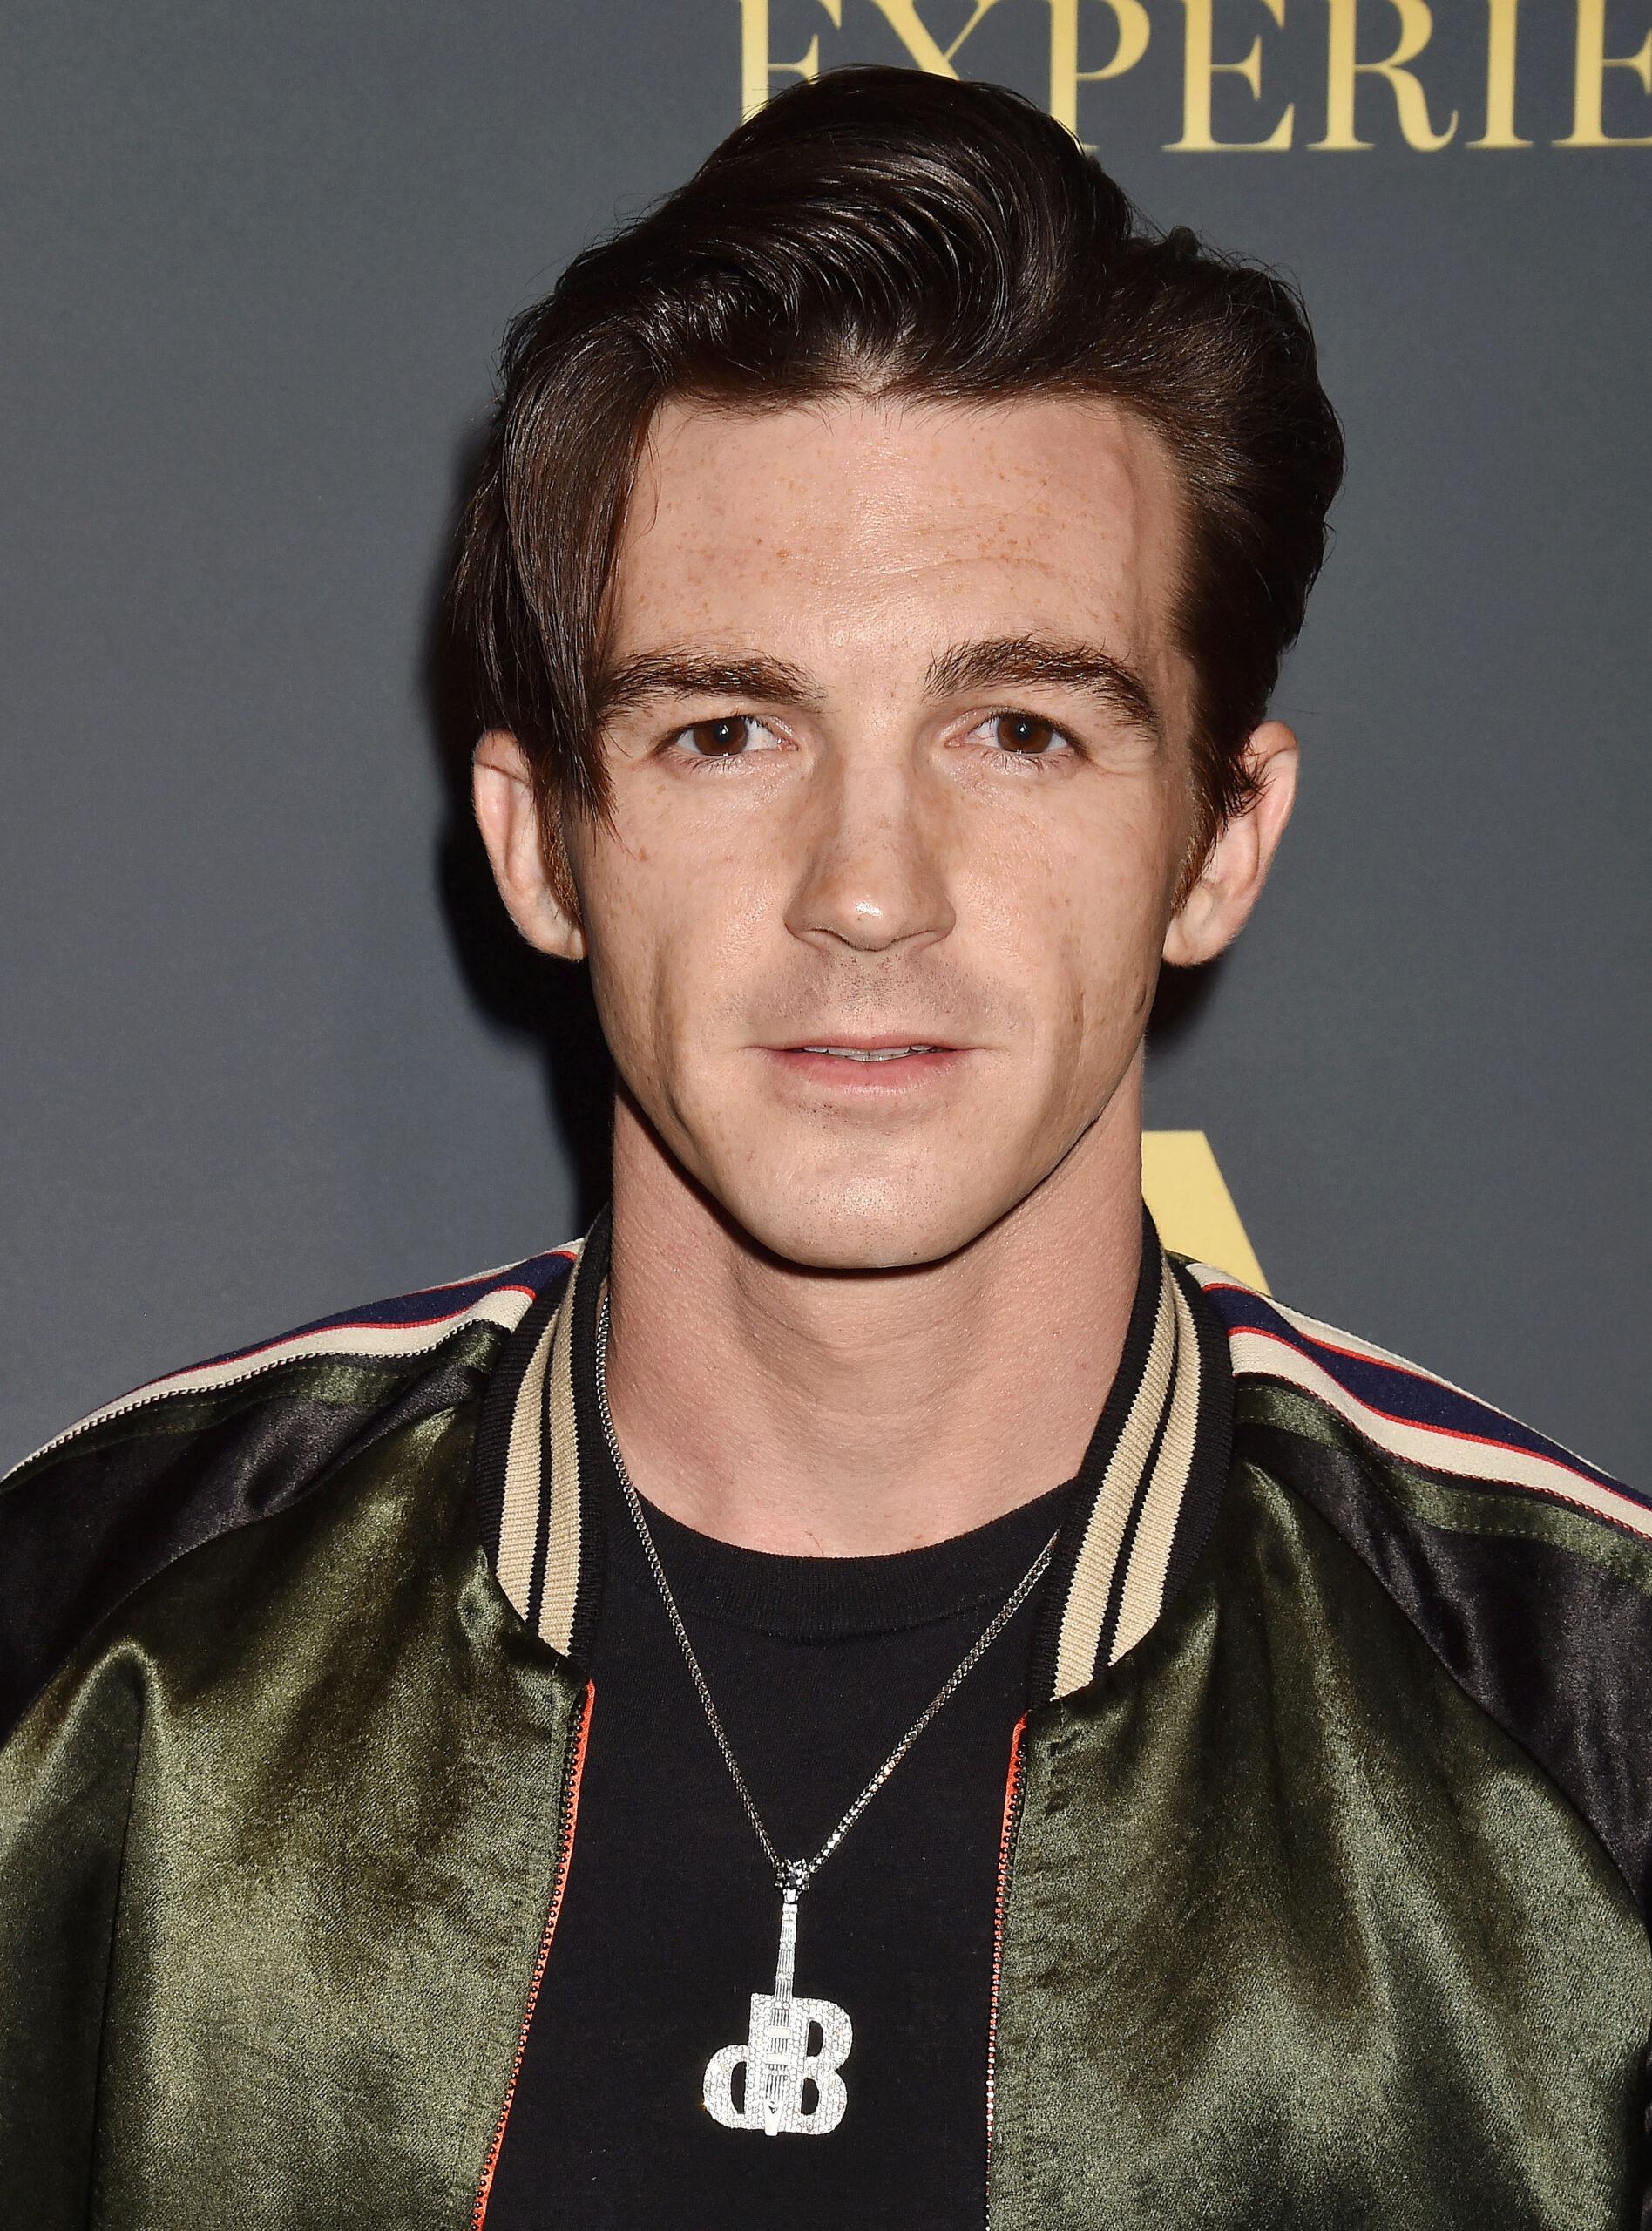 Drake Bell Reportedly Threatened Suicide Prior To Going Missing